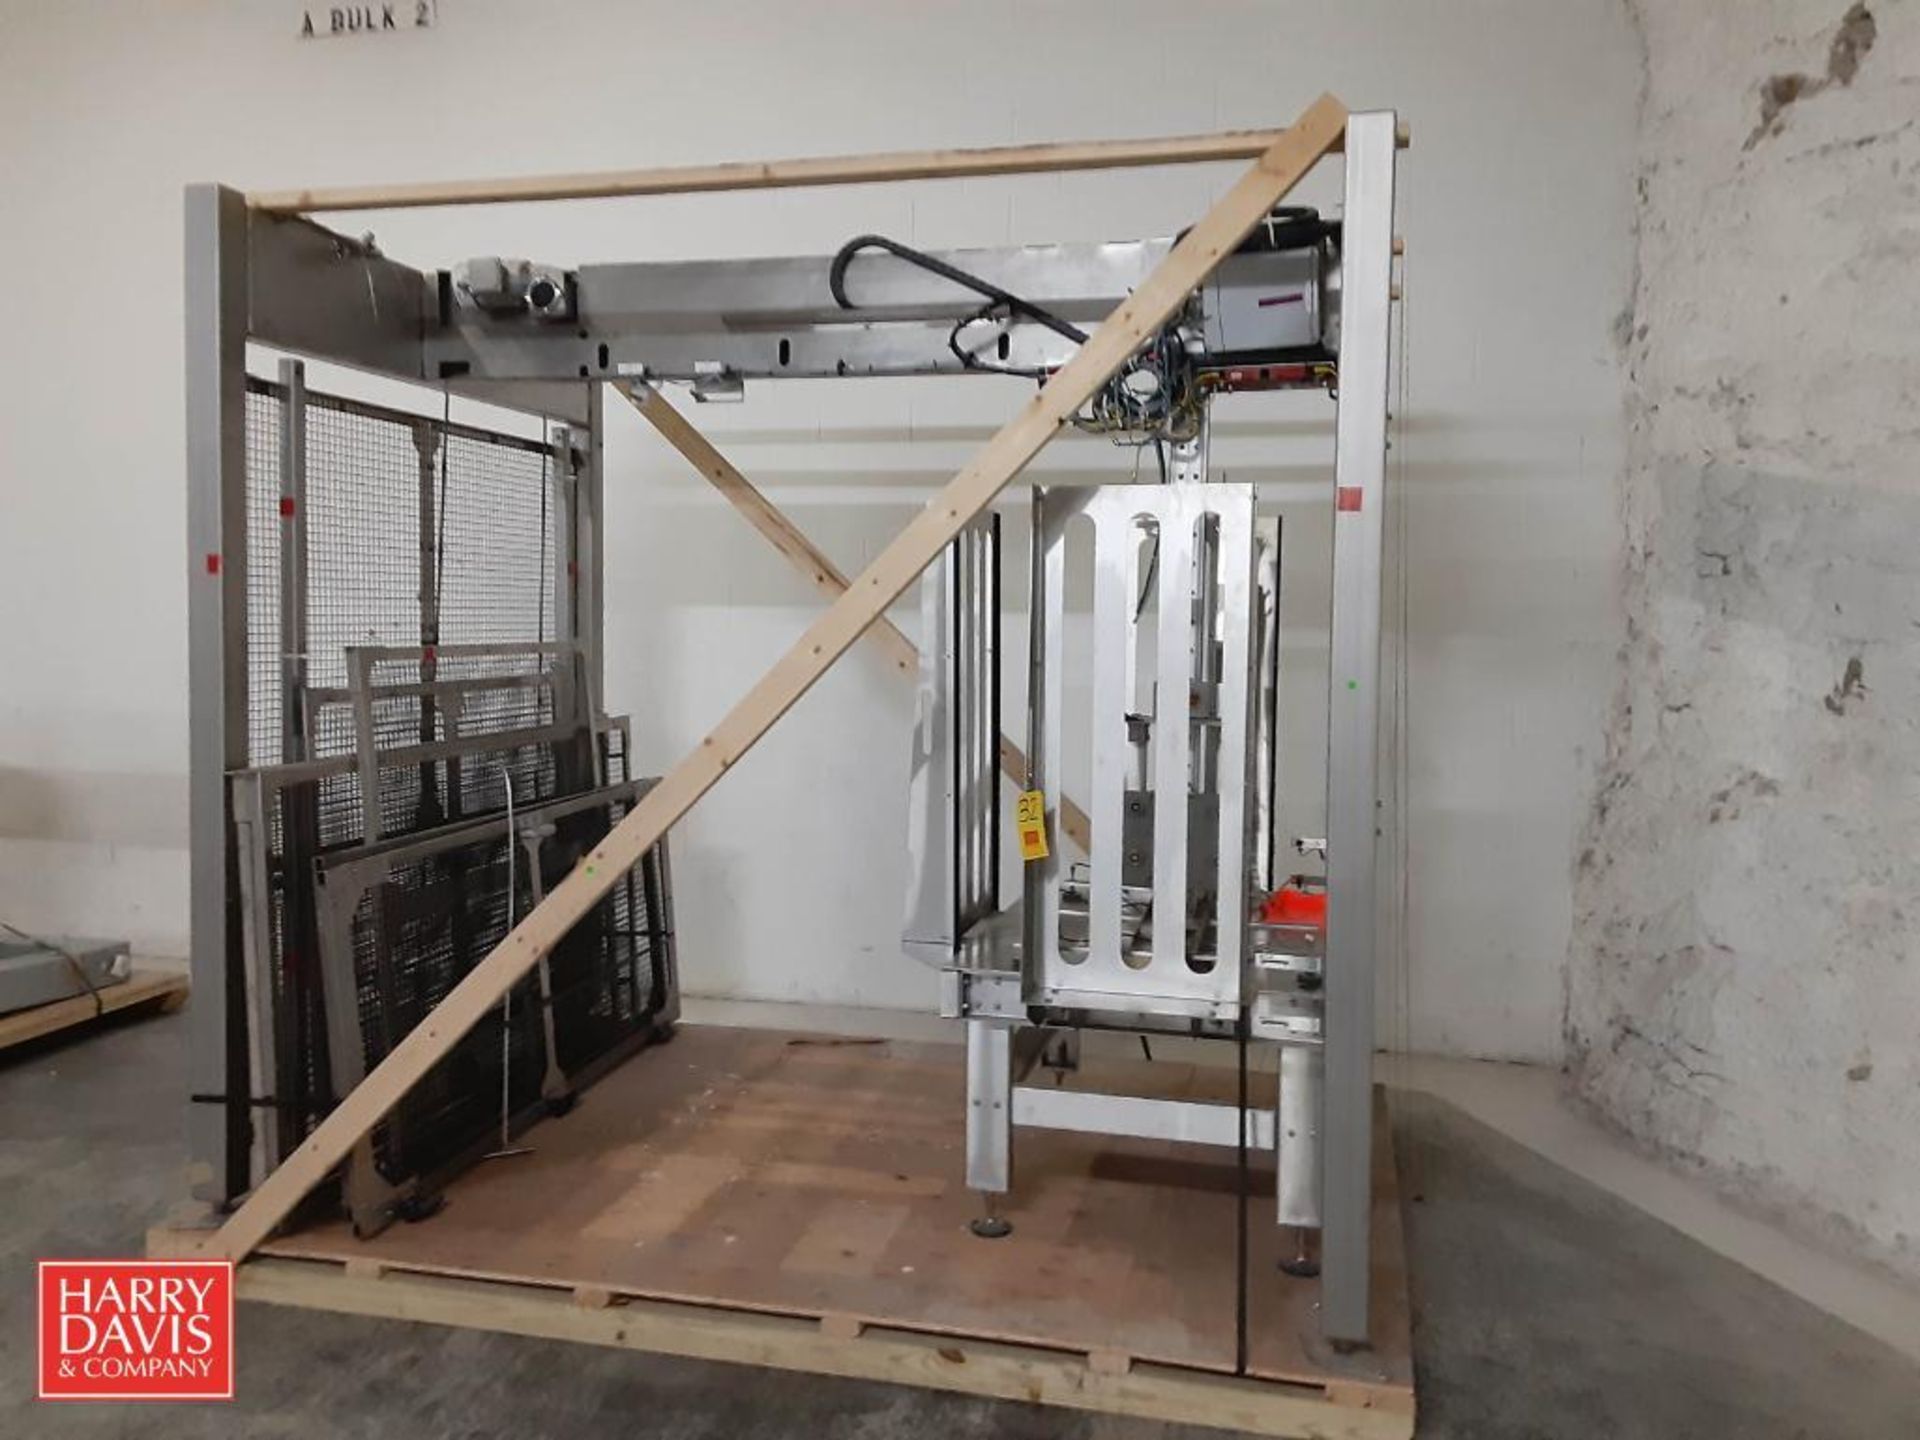 S/S Slip Sheeter System with Safety Cage: 114" Length x 80" Width x 102" Height